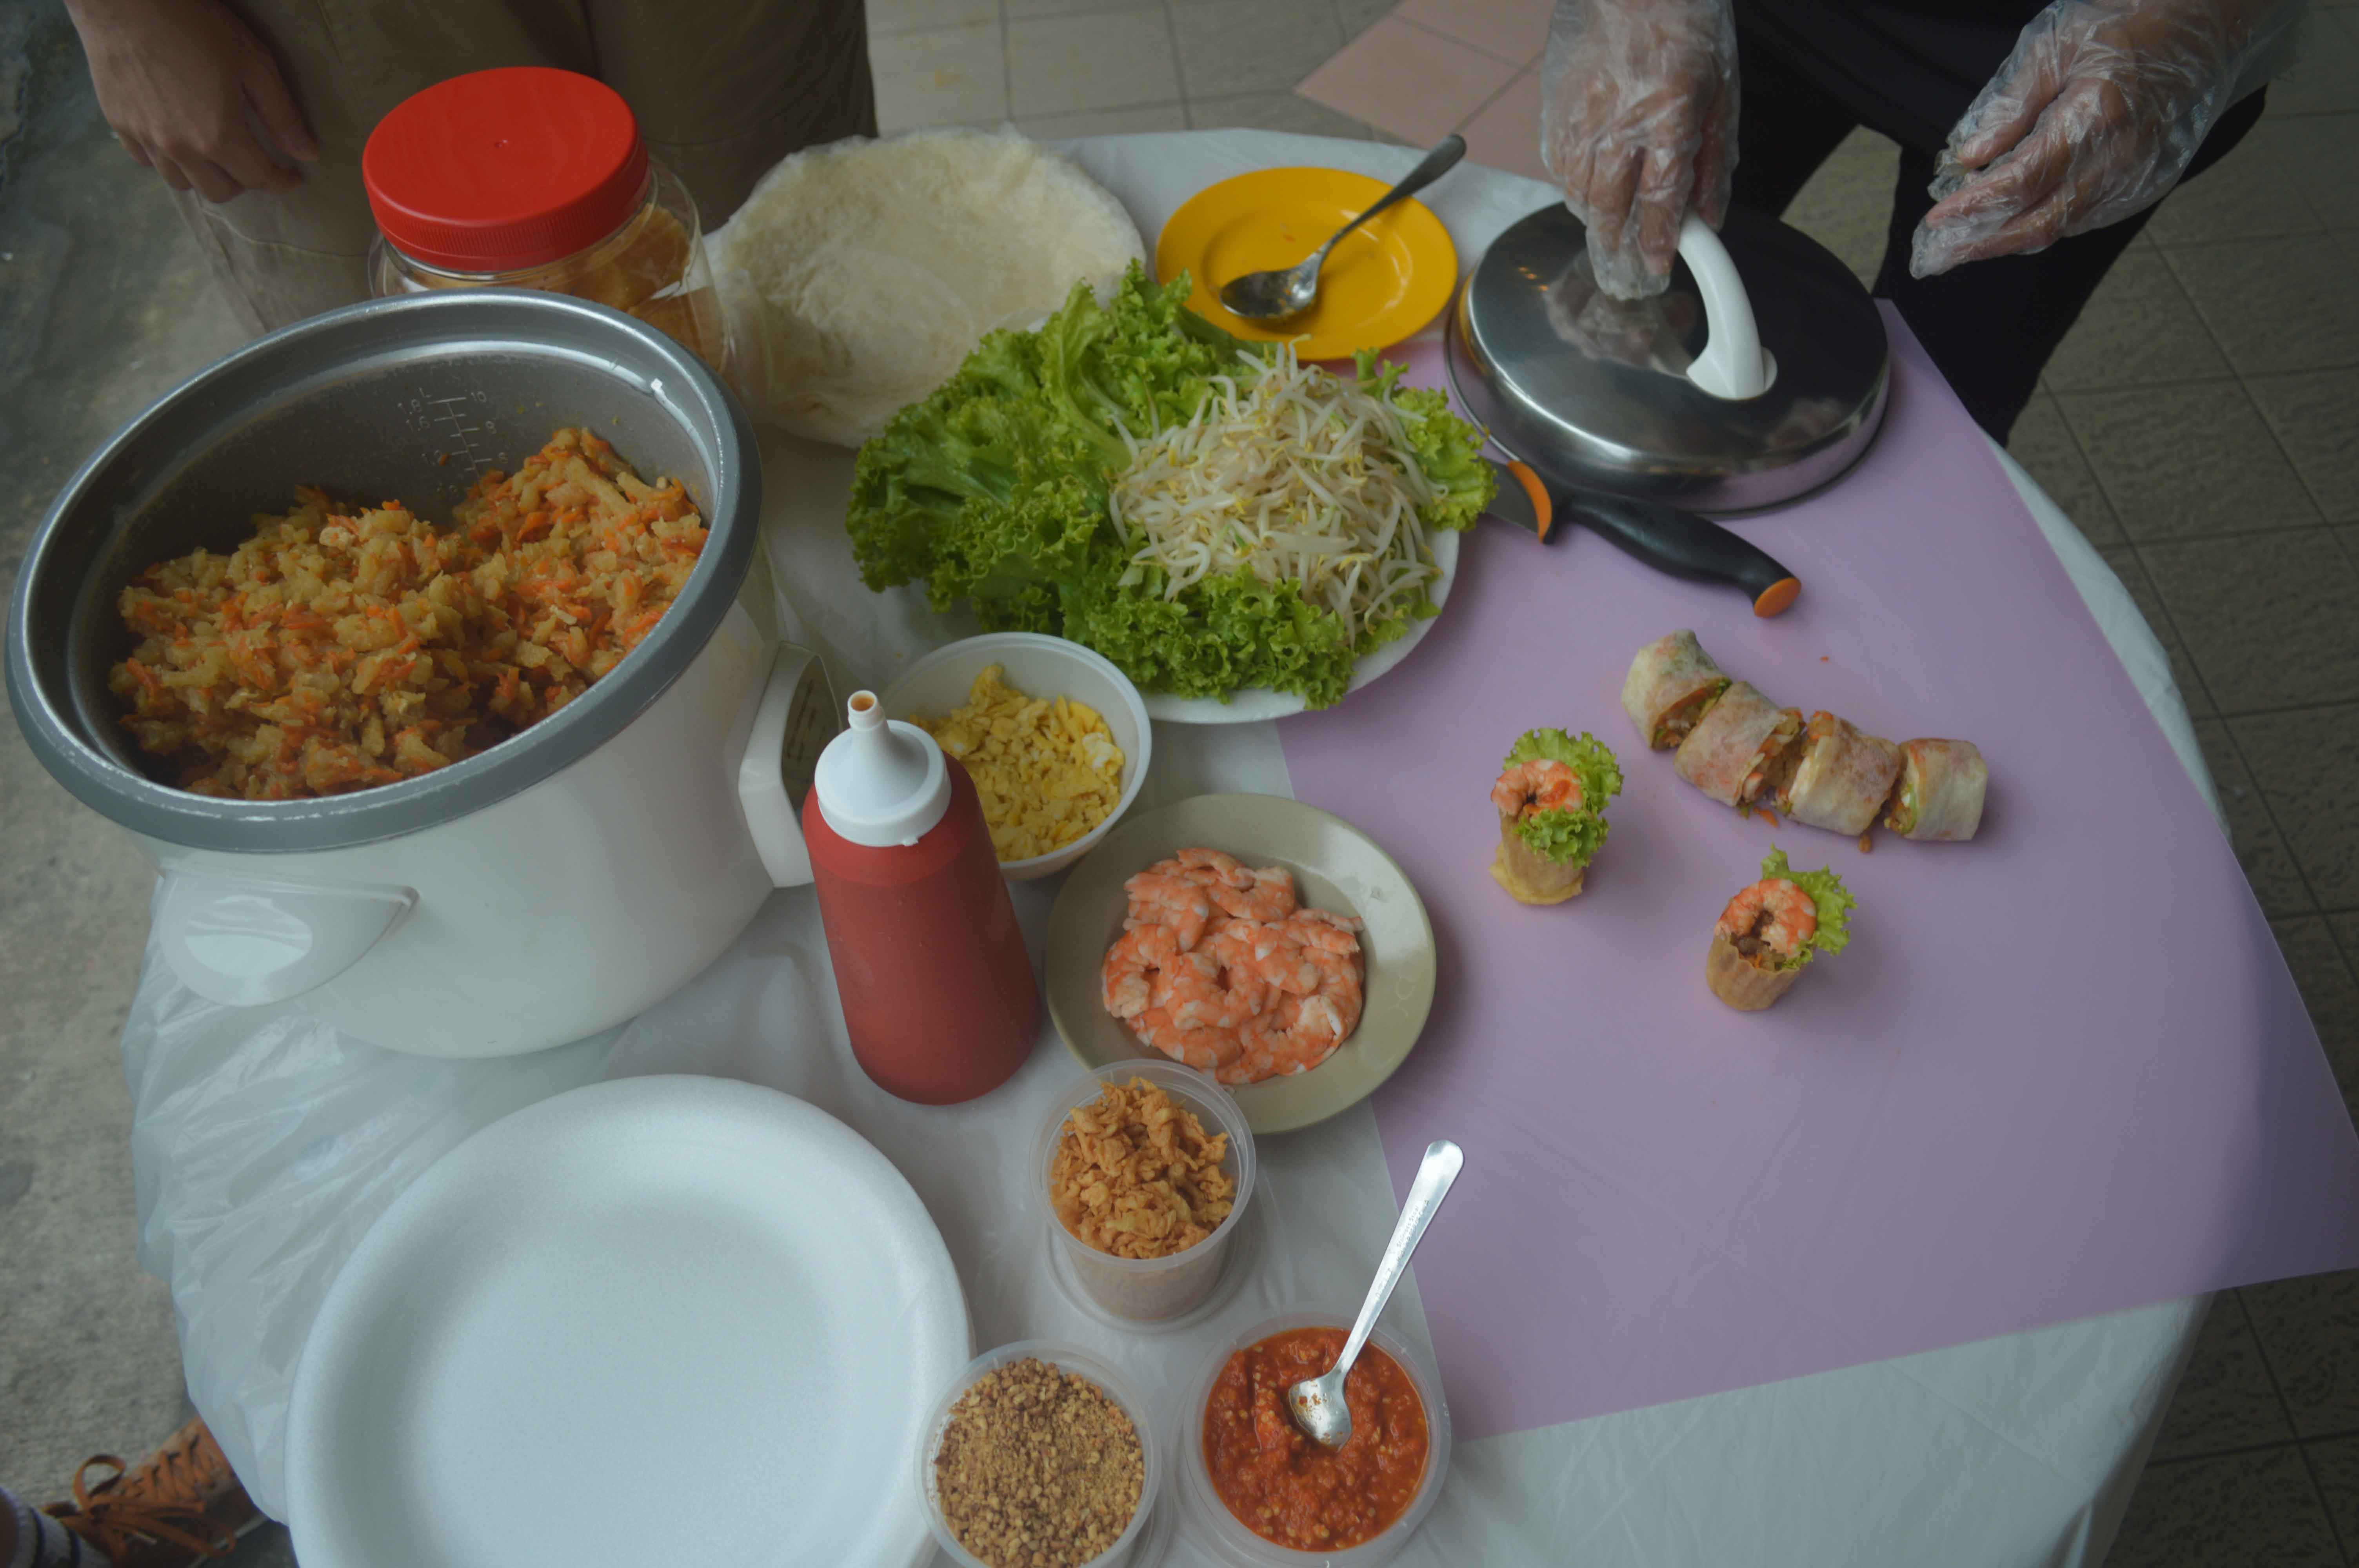 The ingredients for making popiah and kueh pie tee, which are shown on the purple sheet of paper. 